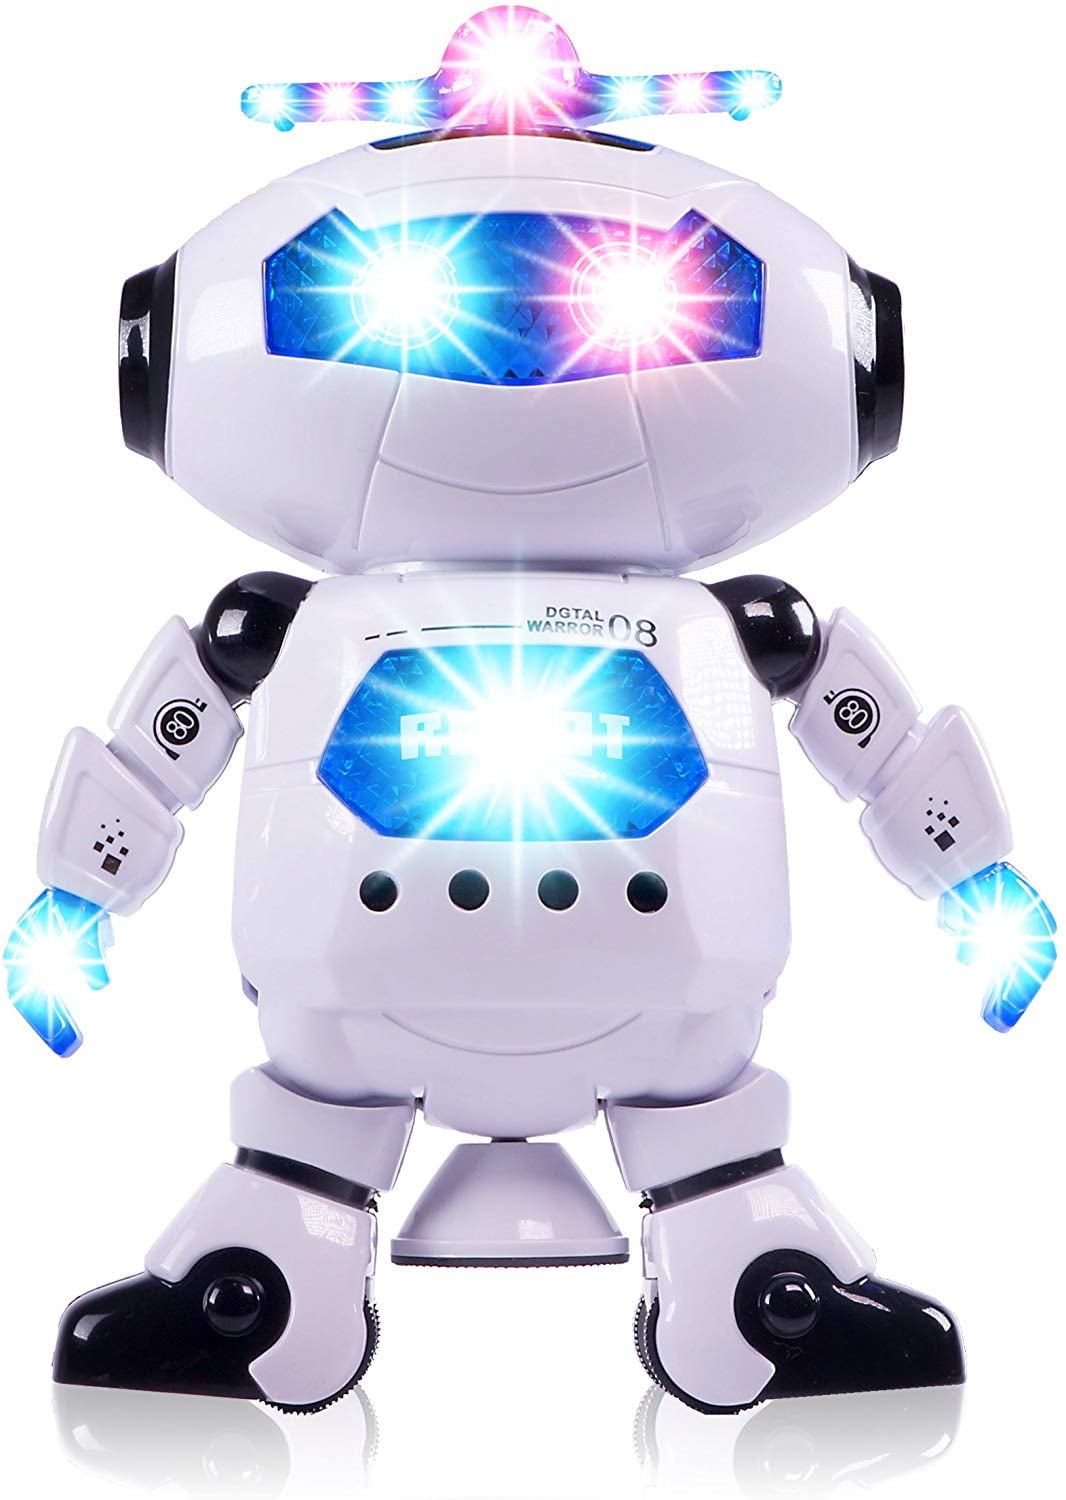 Toys For Boy LED Music Dance Robot for 3 4 5 6 7 8 9 10 Years Age Old Kids Gift 